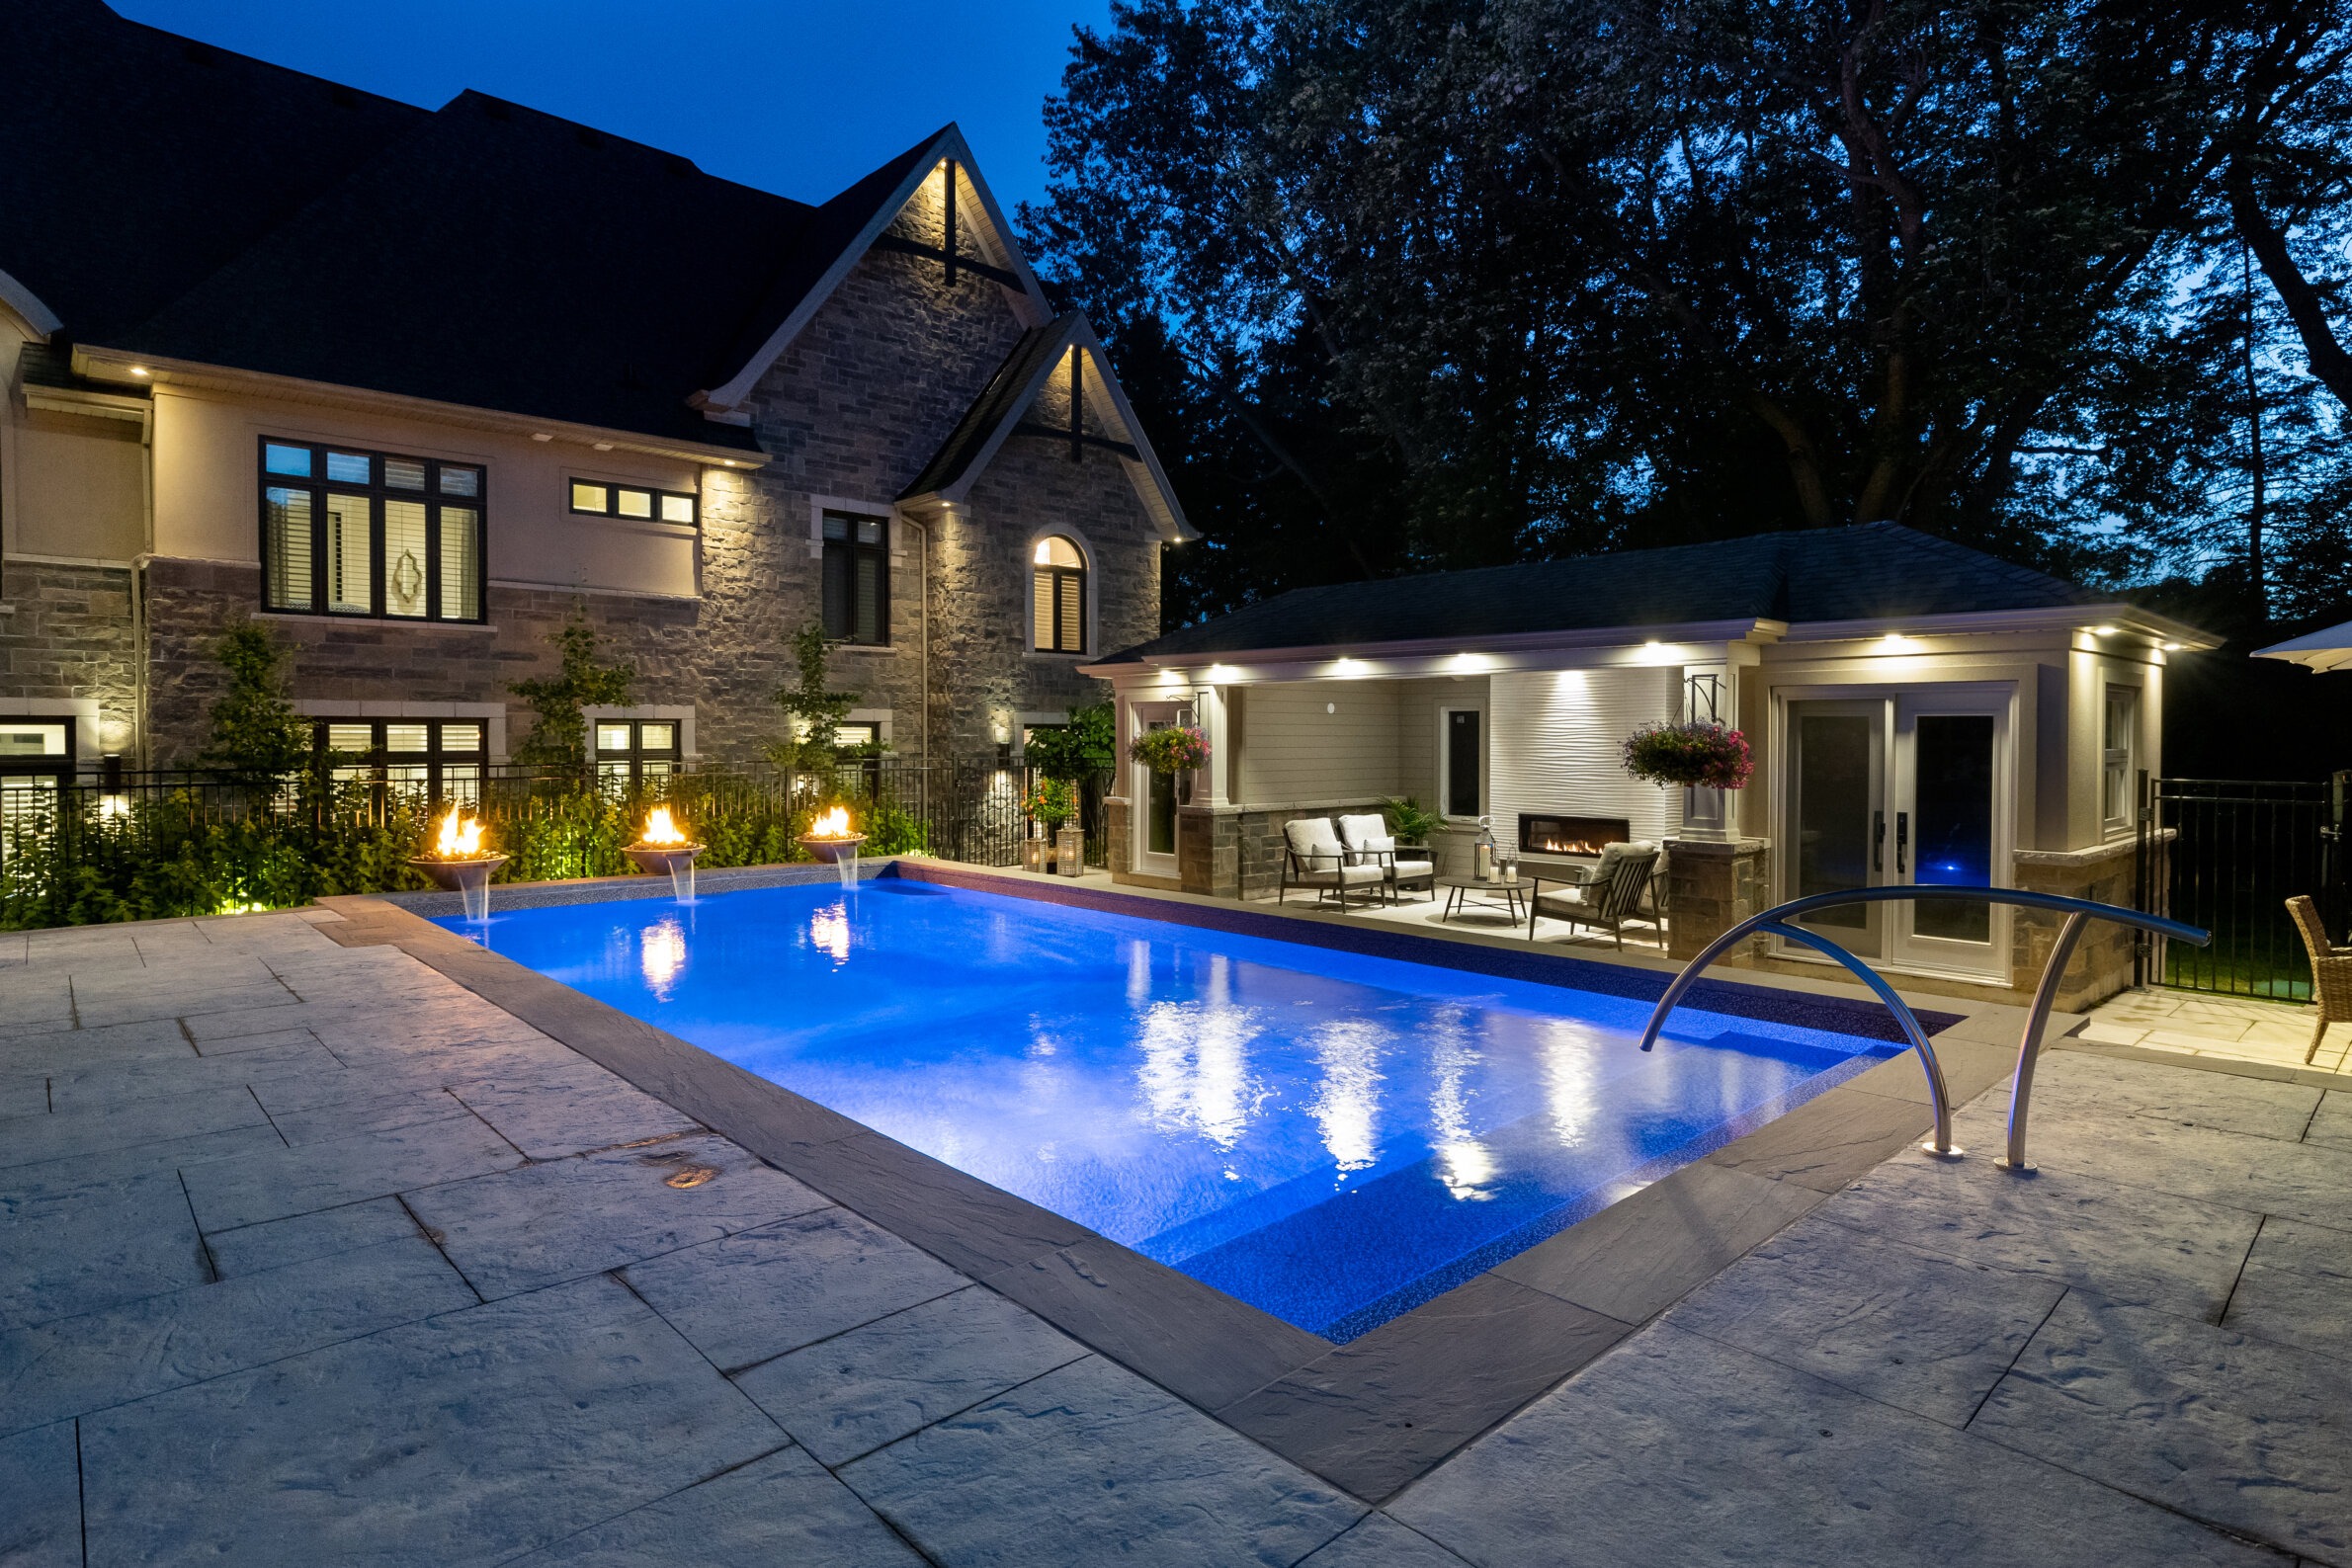 This image shows an illuminated, luxurious backyard with a pool at dusk, featuring a stone house, outdoor seating, and torch-like fire elements.